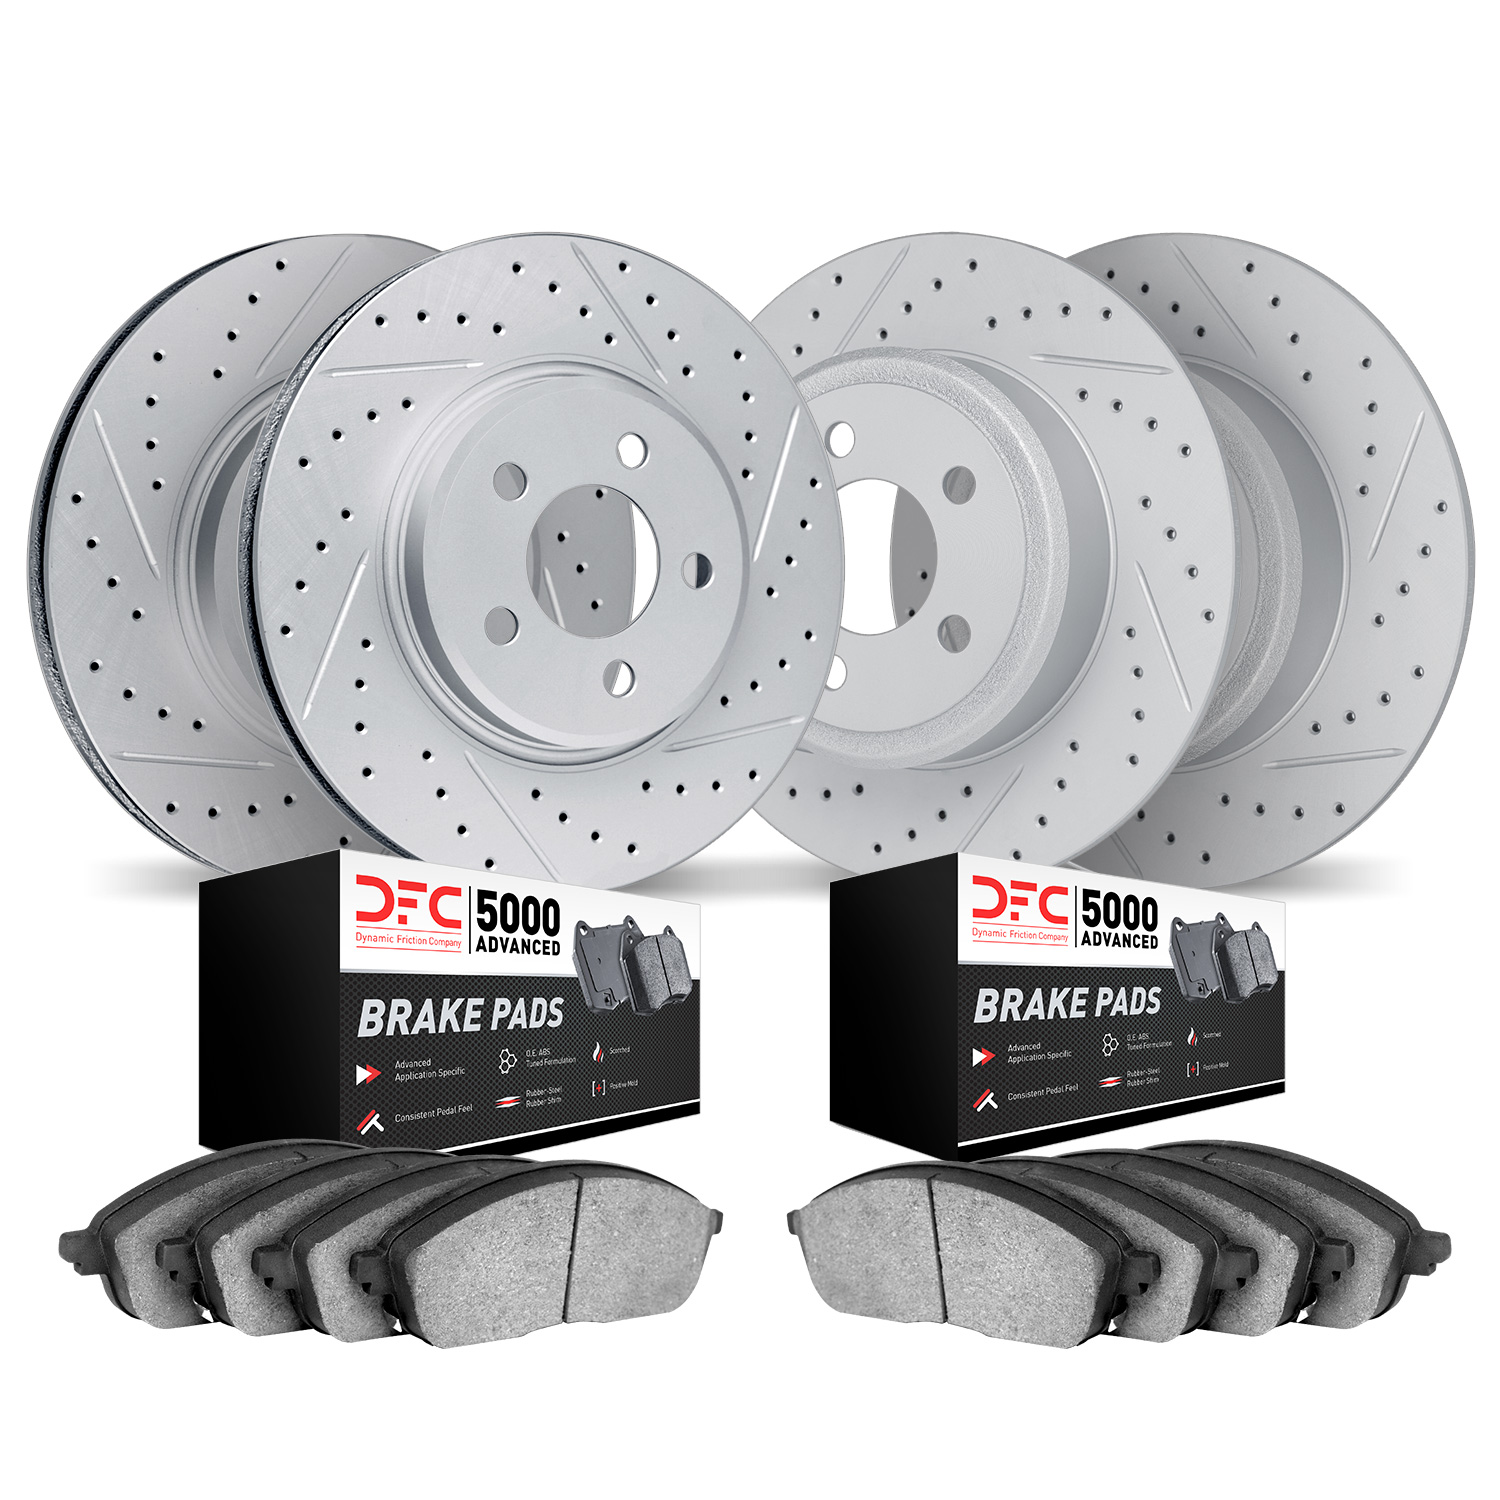 2504-76107 Geoperformance Drilled/Slotted Rotors w/5000 Advanced Brake Pads Kit, Fits Select Lexus/Toyota/Scion, Position: Front